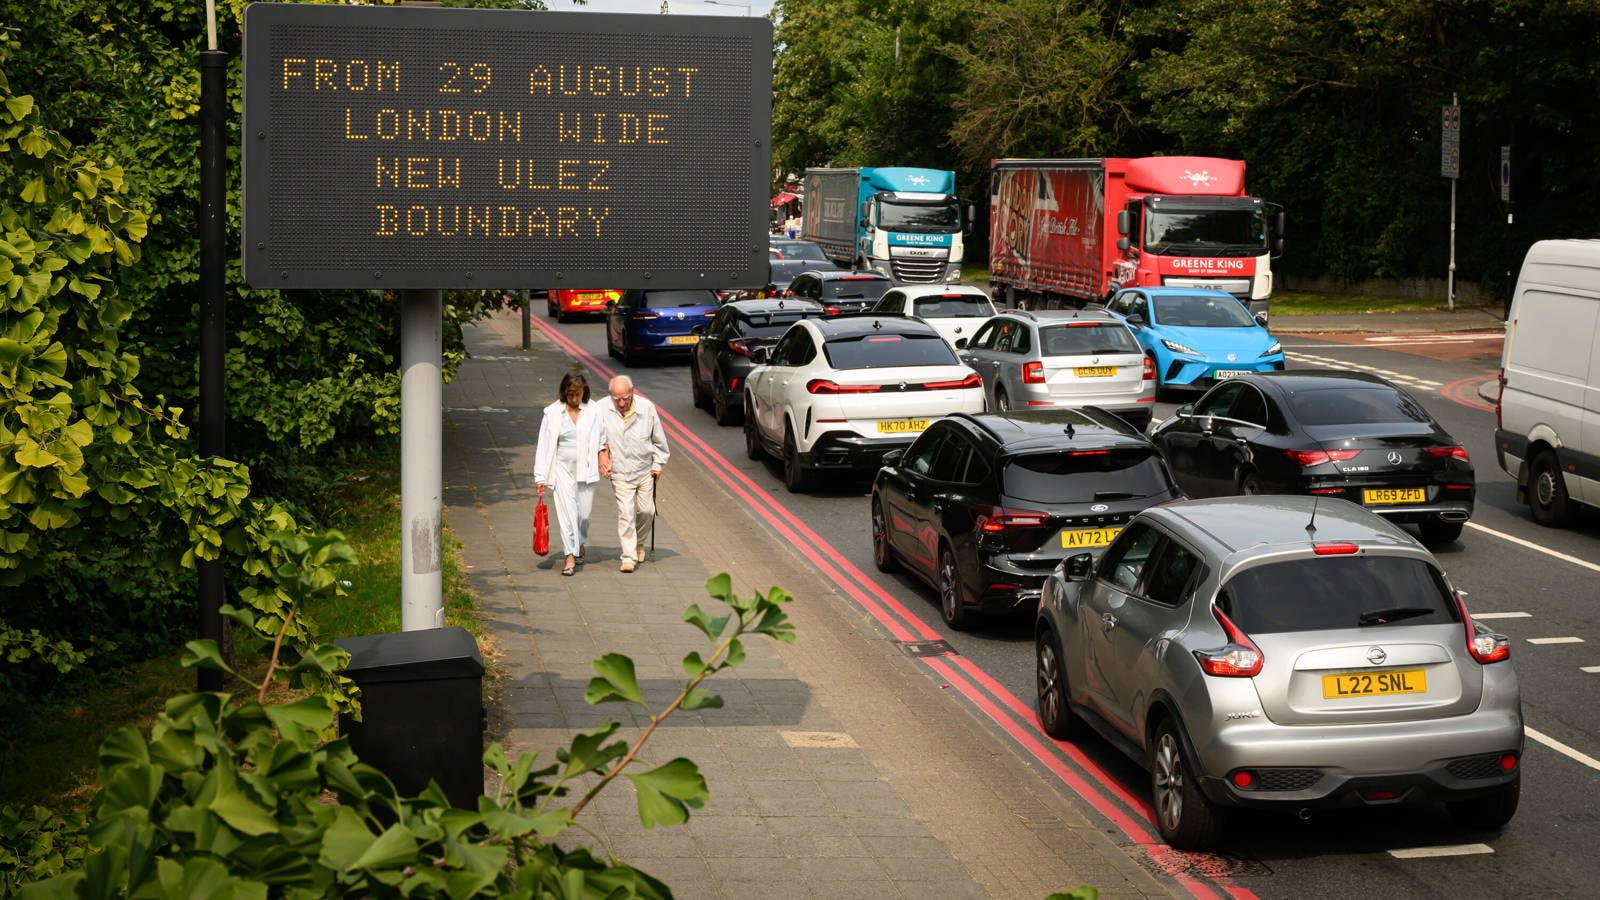 Can fees on polluting cars clean the air? London has new evidence